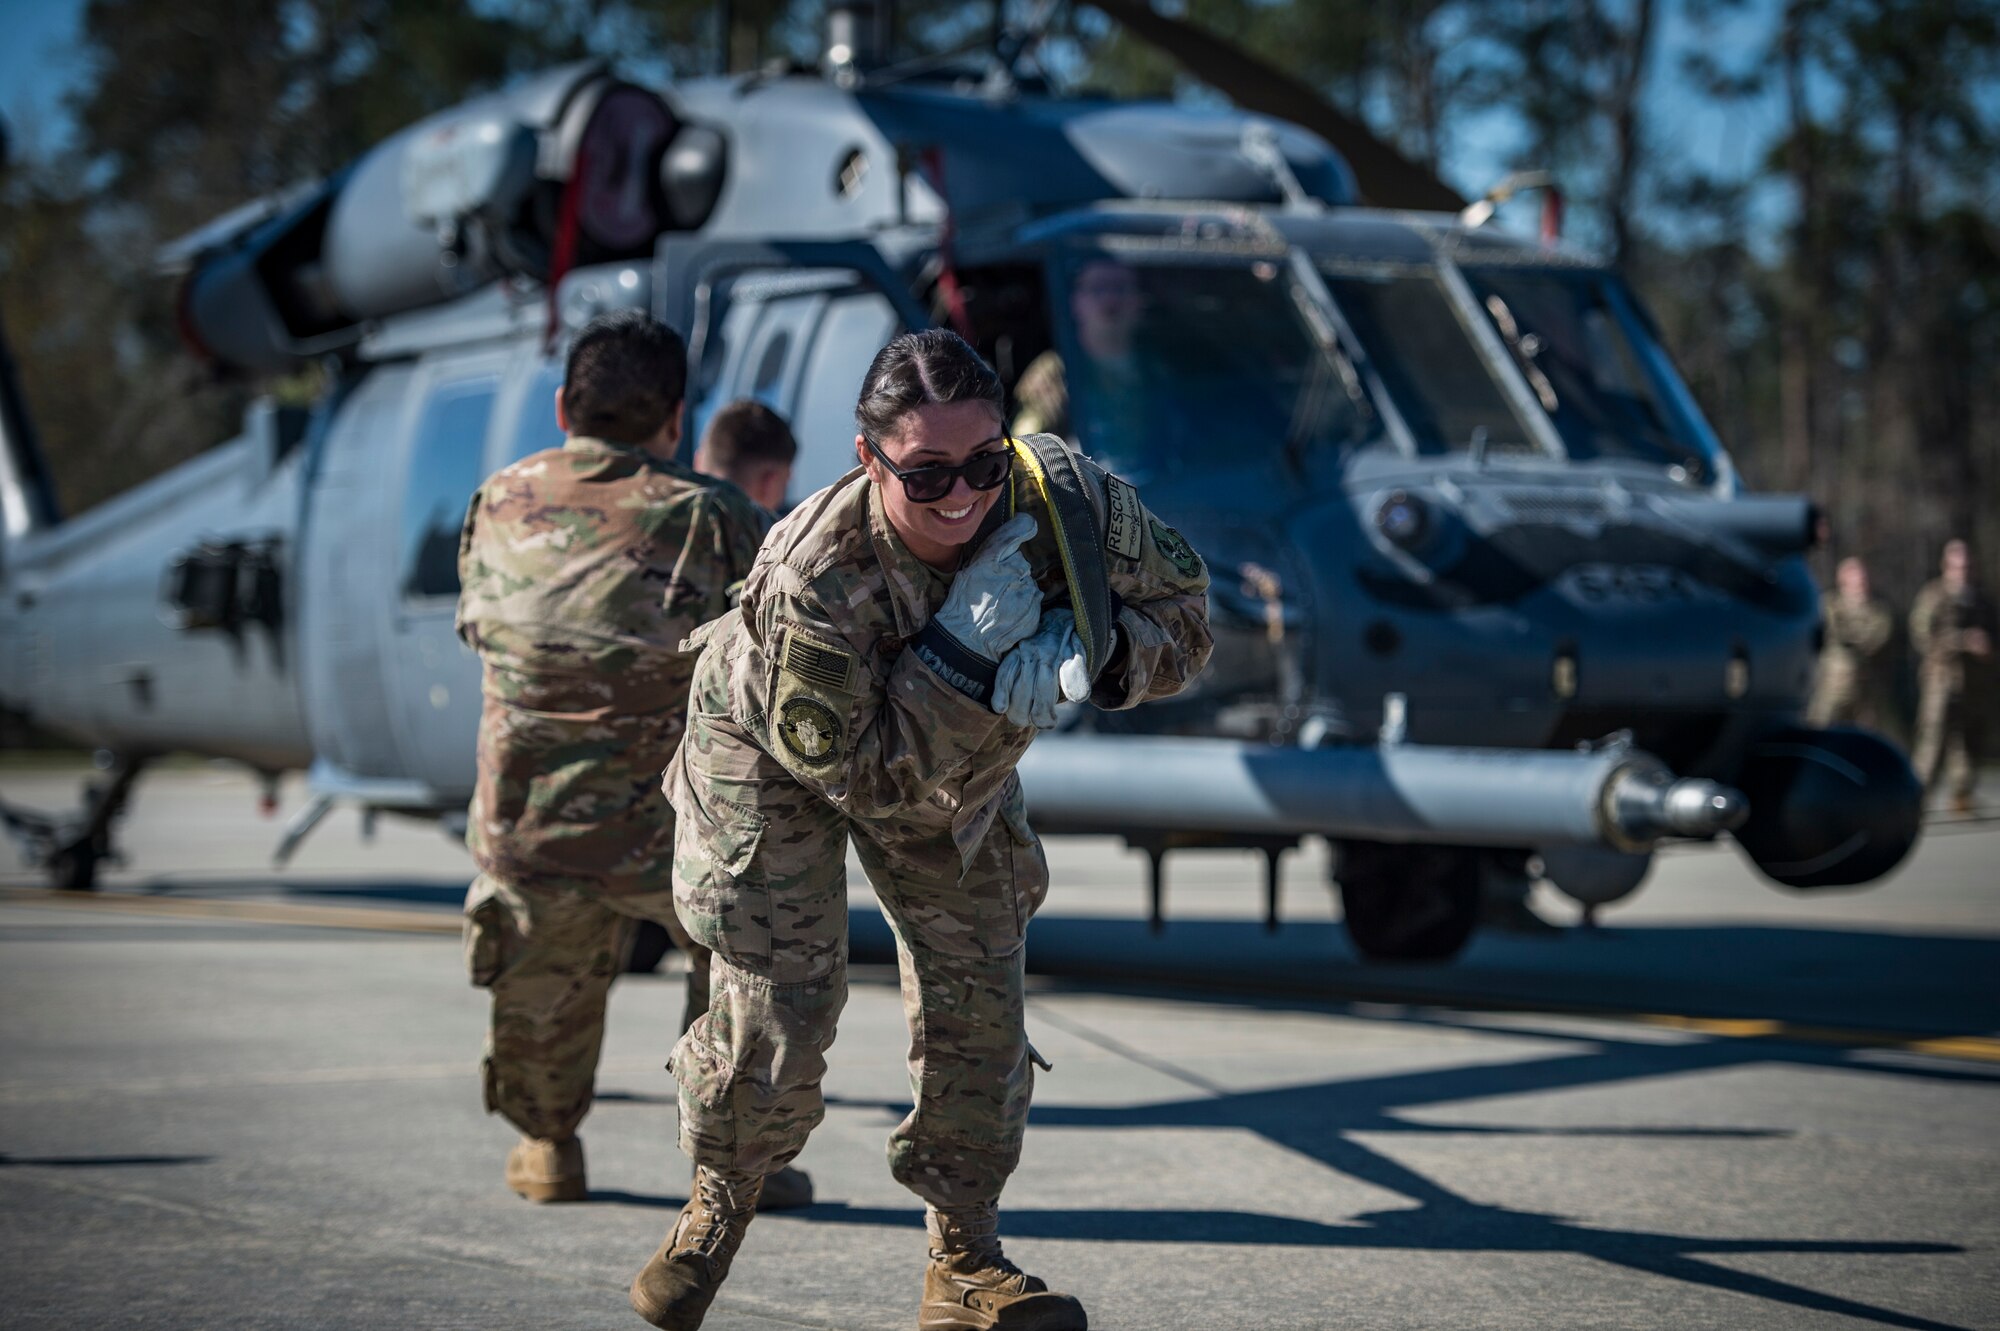 Airmen from the 71st Aircraft Maintenance Unit pull an HH-60G Pave Hawk helicopter during an aircraft pull challenge, March 9, 2018, at Moody Air Force Base, Ga. The challenge was part of a Comprehensive Airman Fitness super sports day event where the 71st AMU and 41st Helicopter Maintenance Unit faced off for bragging rights. (U.S. Air Force Photo by Senior Airman Janiqua P. Robinson)